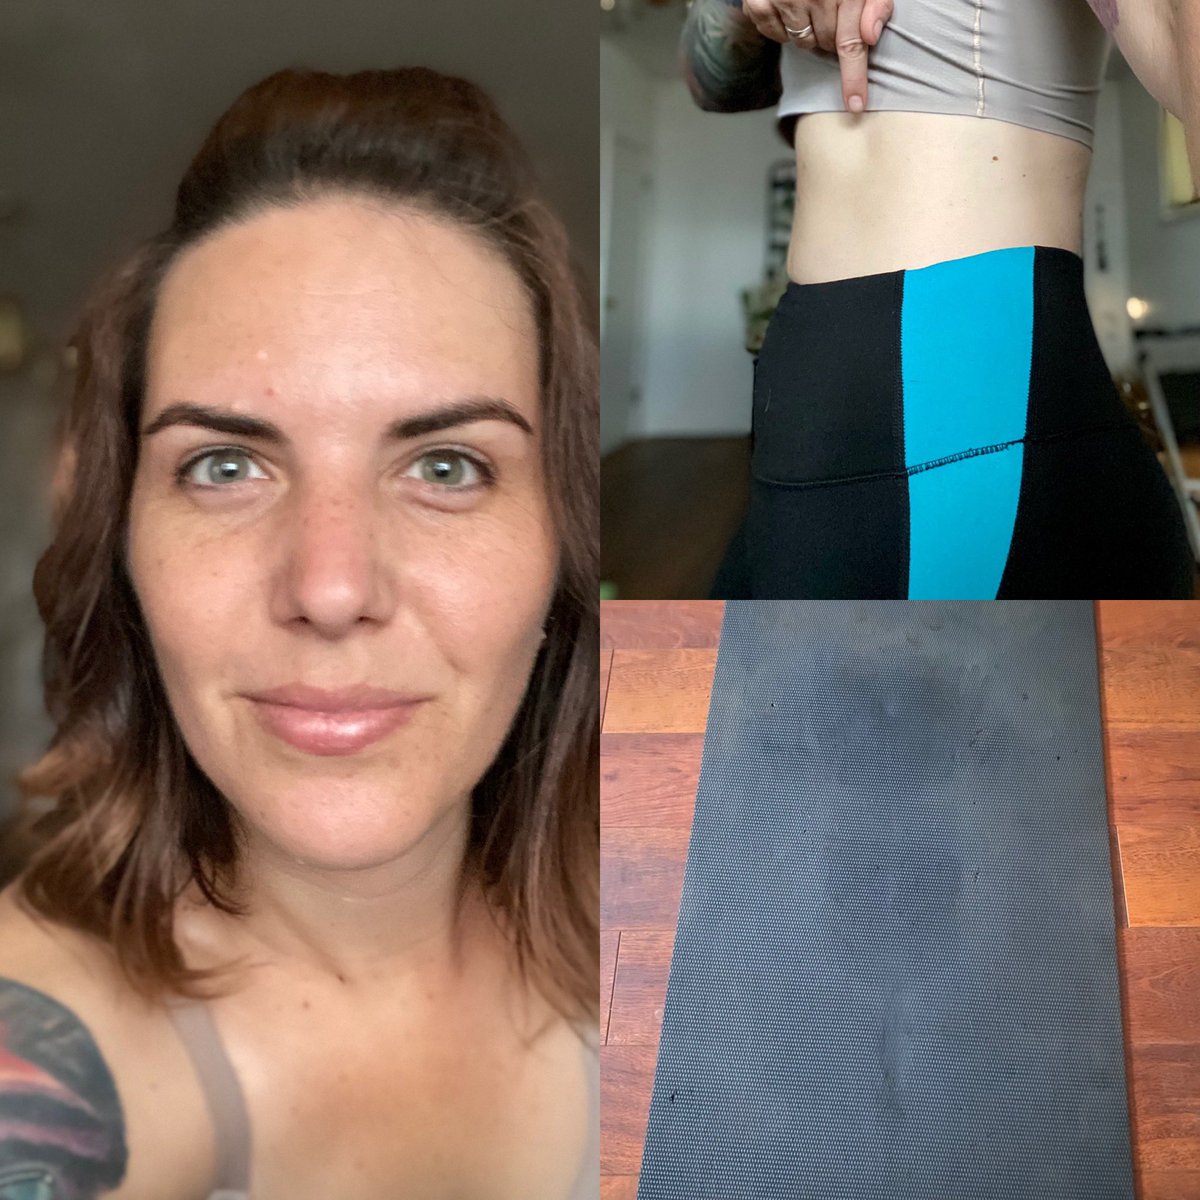 #StretchySaturday in the books. Complete with yard work, house chores, and grocery run towards my #MunroStepChallenge steps! And a nice little new toned spot for some personal motivation. 

Happy Weekend Peakers! @mypeakchallenge